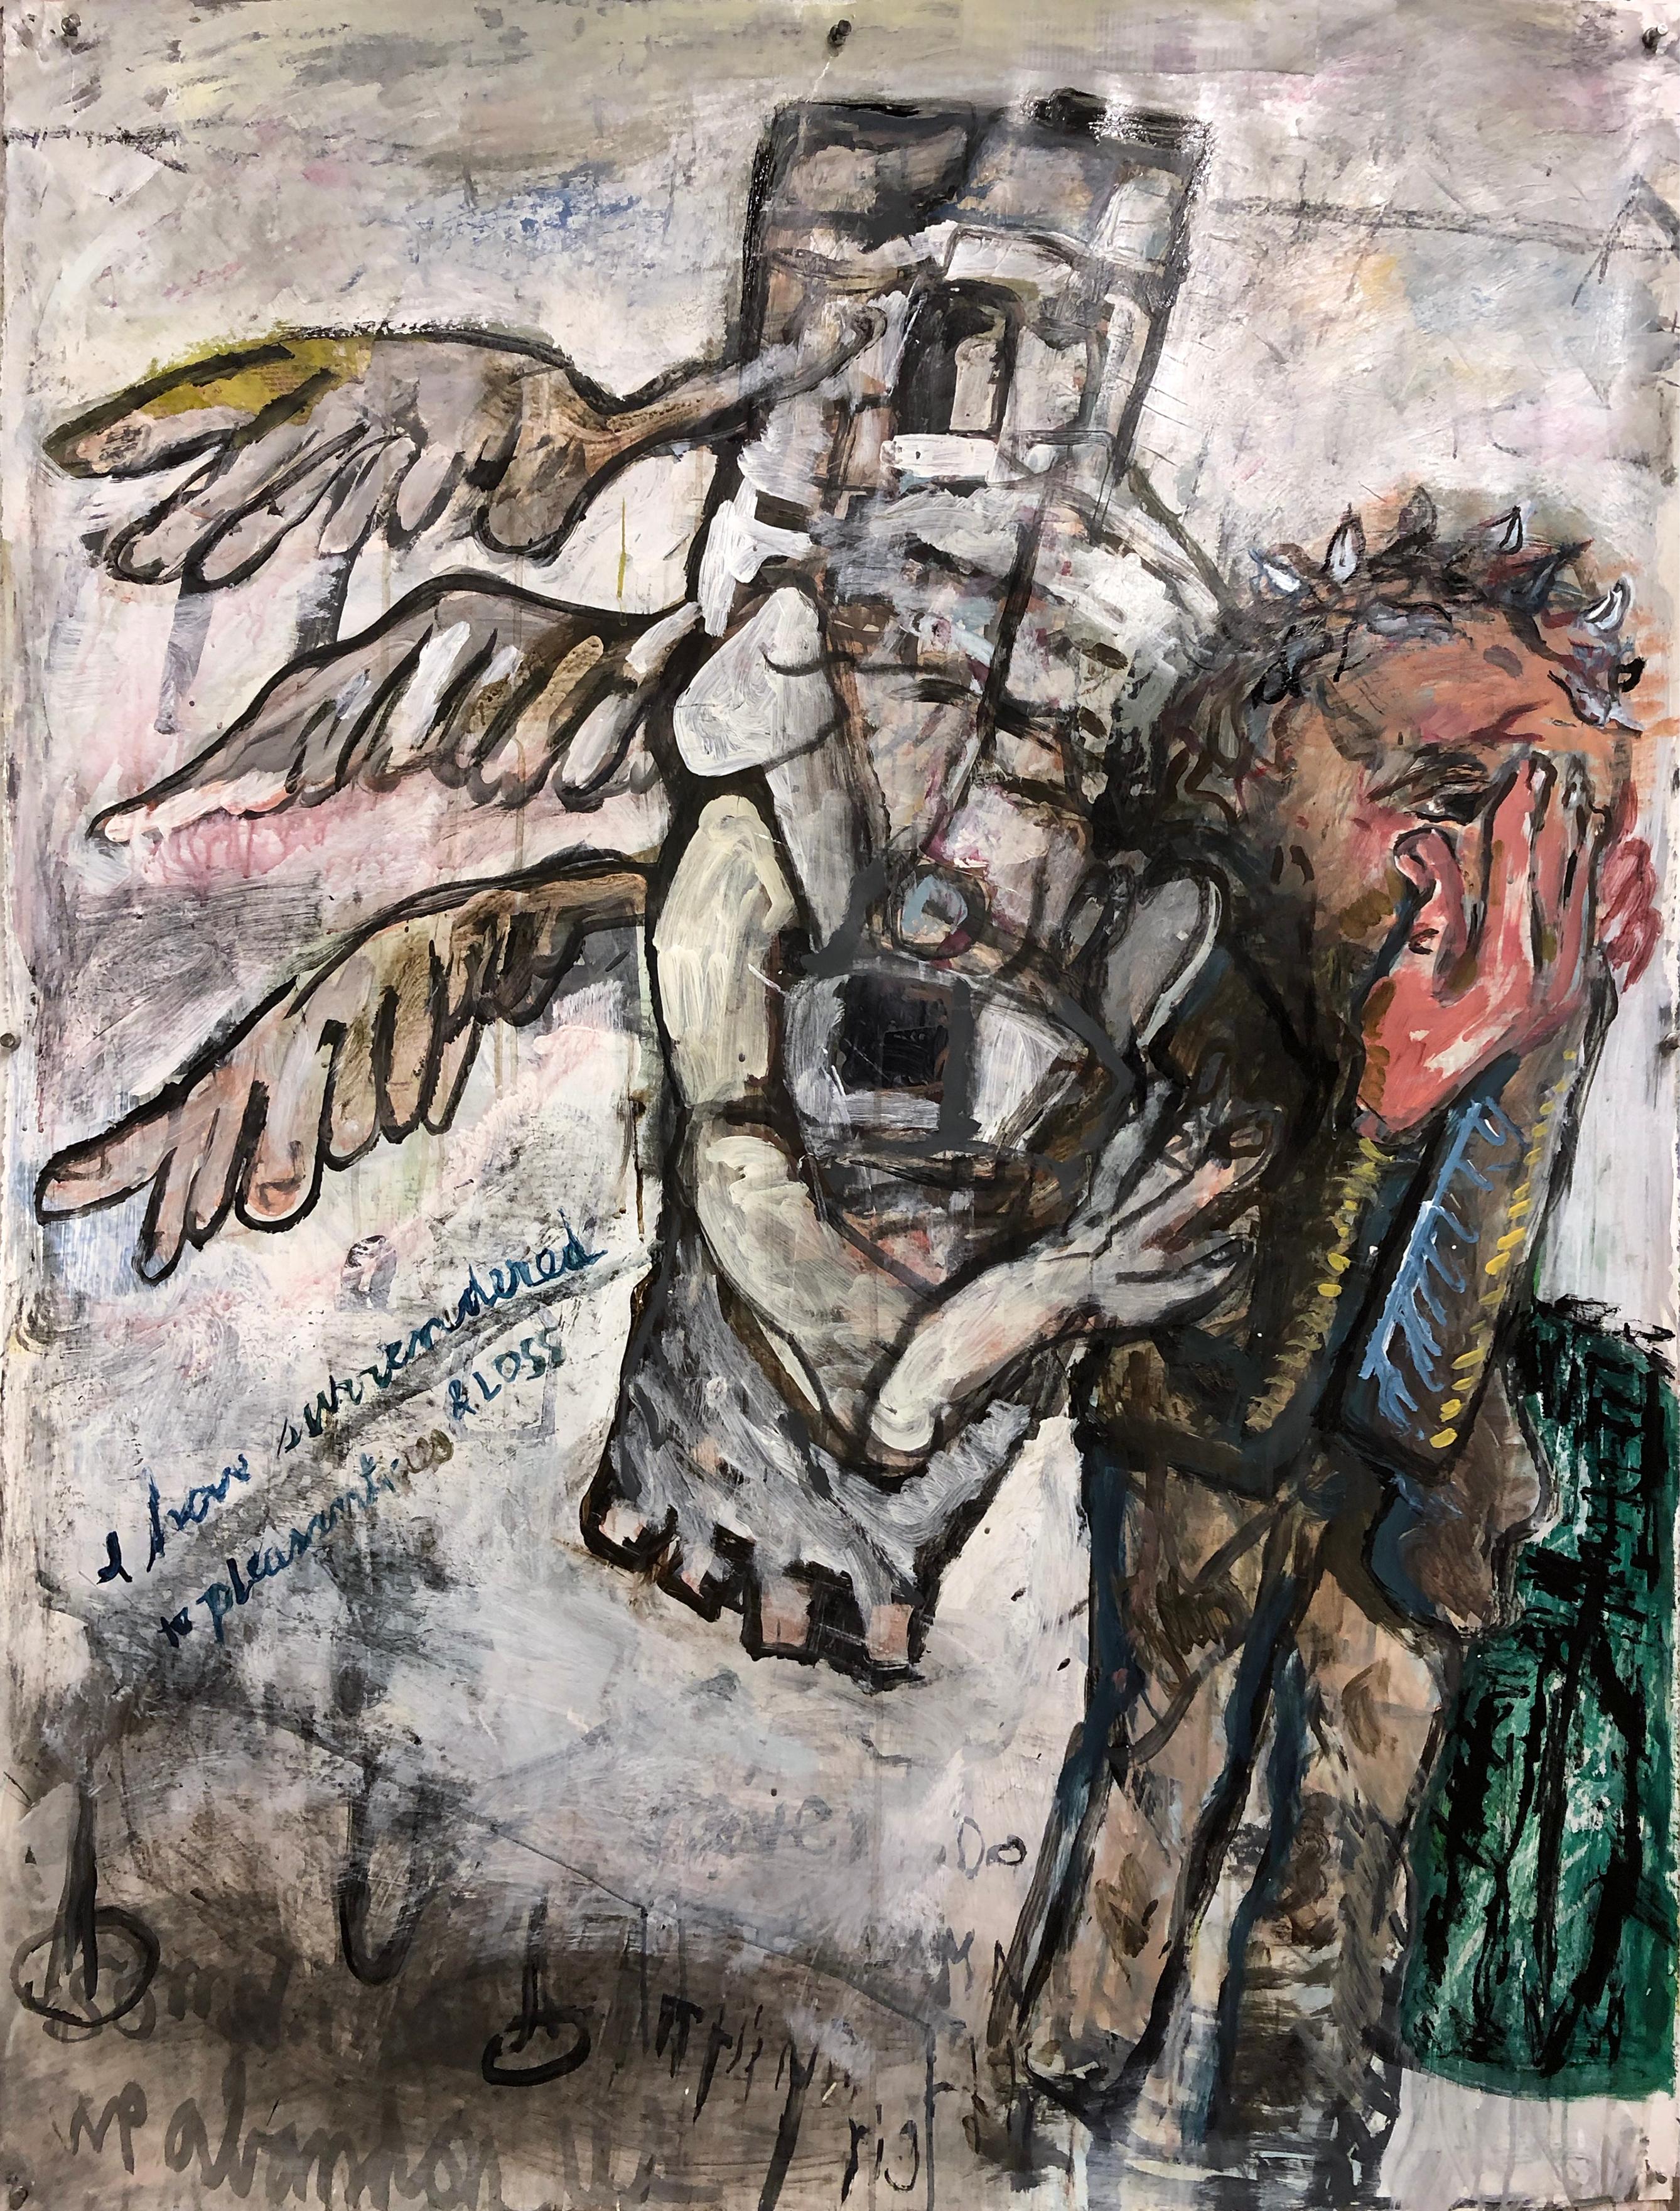 "One Waiting Too", acrylic, paper, angels, humanity, loss, myth, surrender - Mixed Media Art by Dale Williams